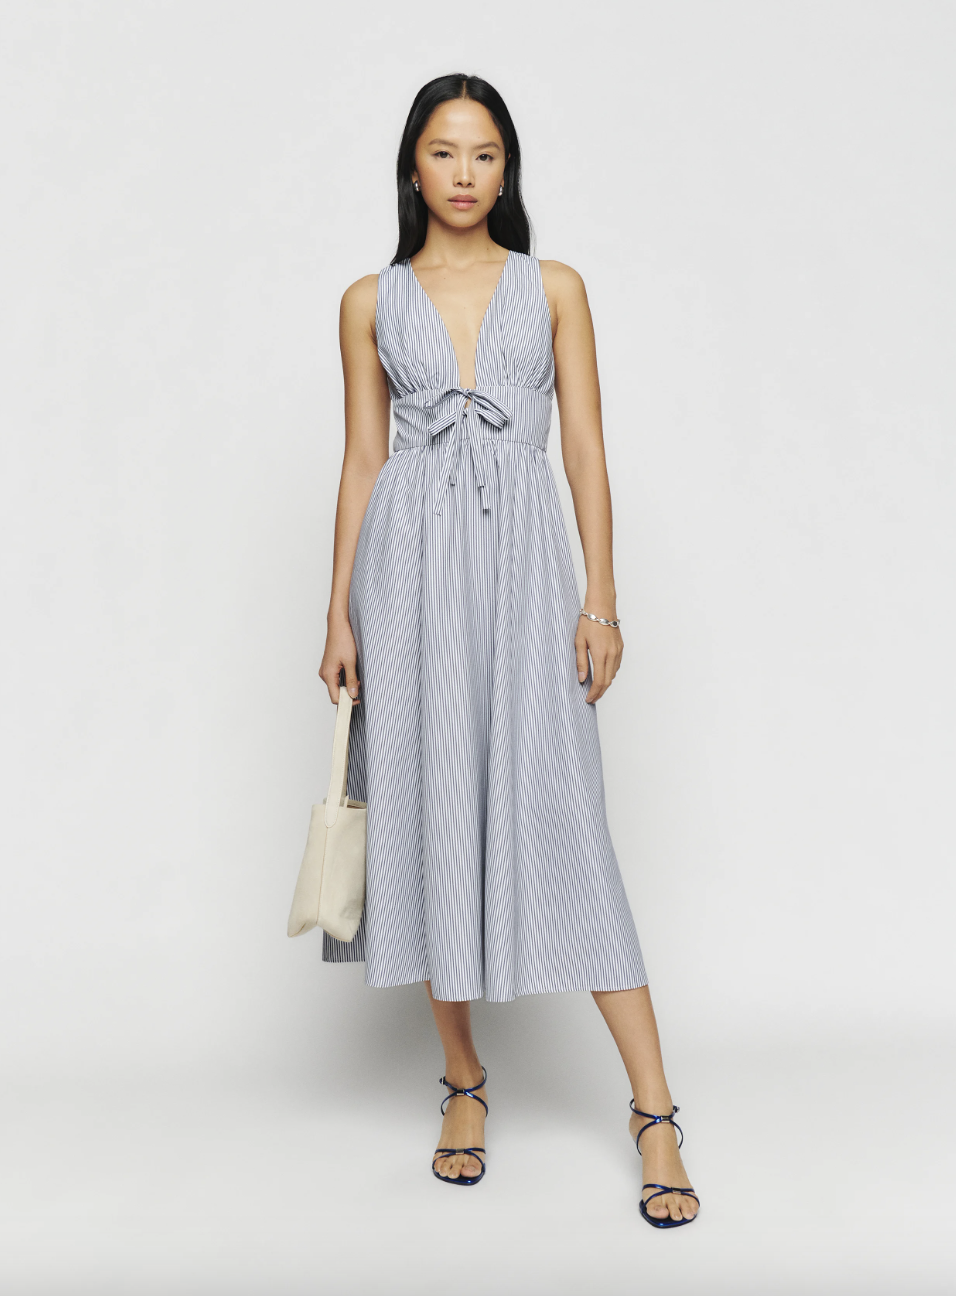 Model in long blue and white Reformation Alvin dress (photo from Reformation)